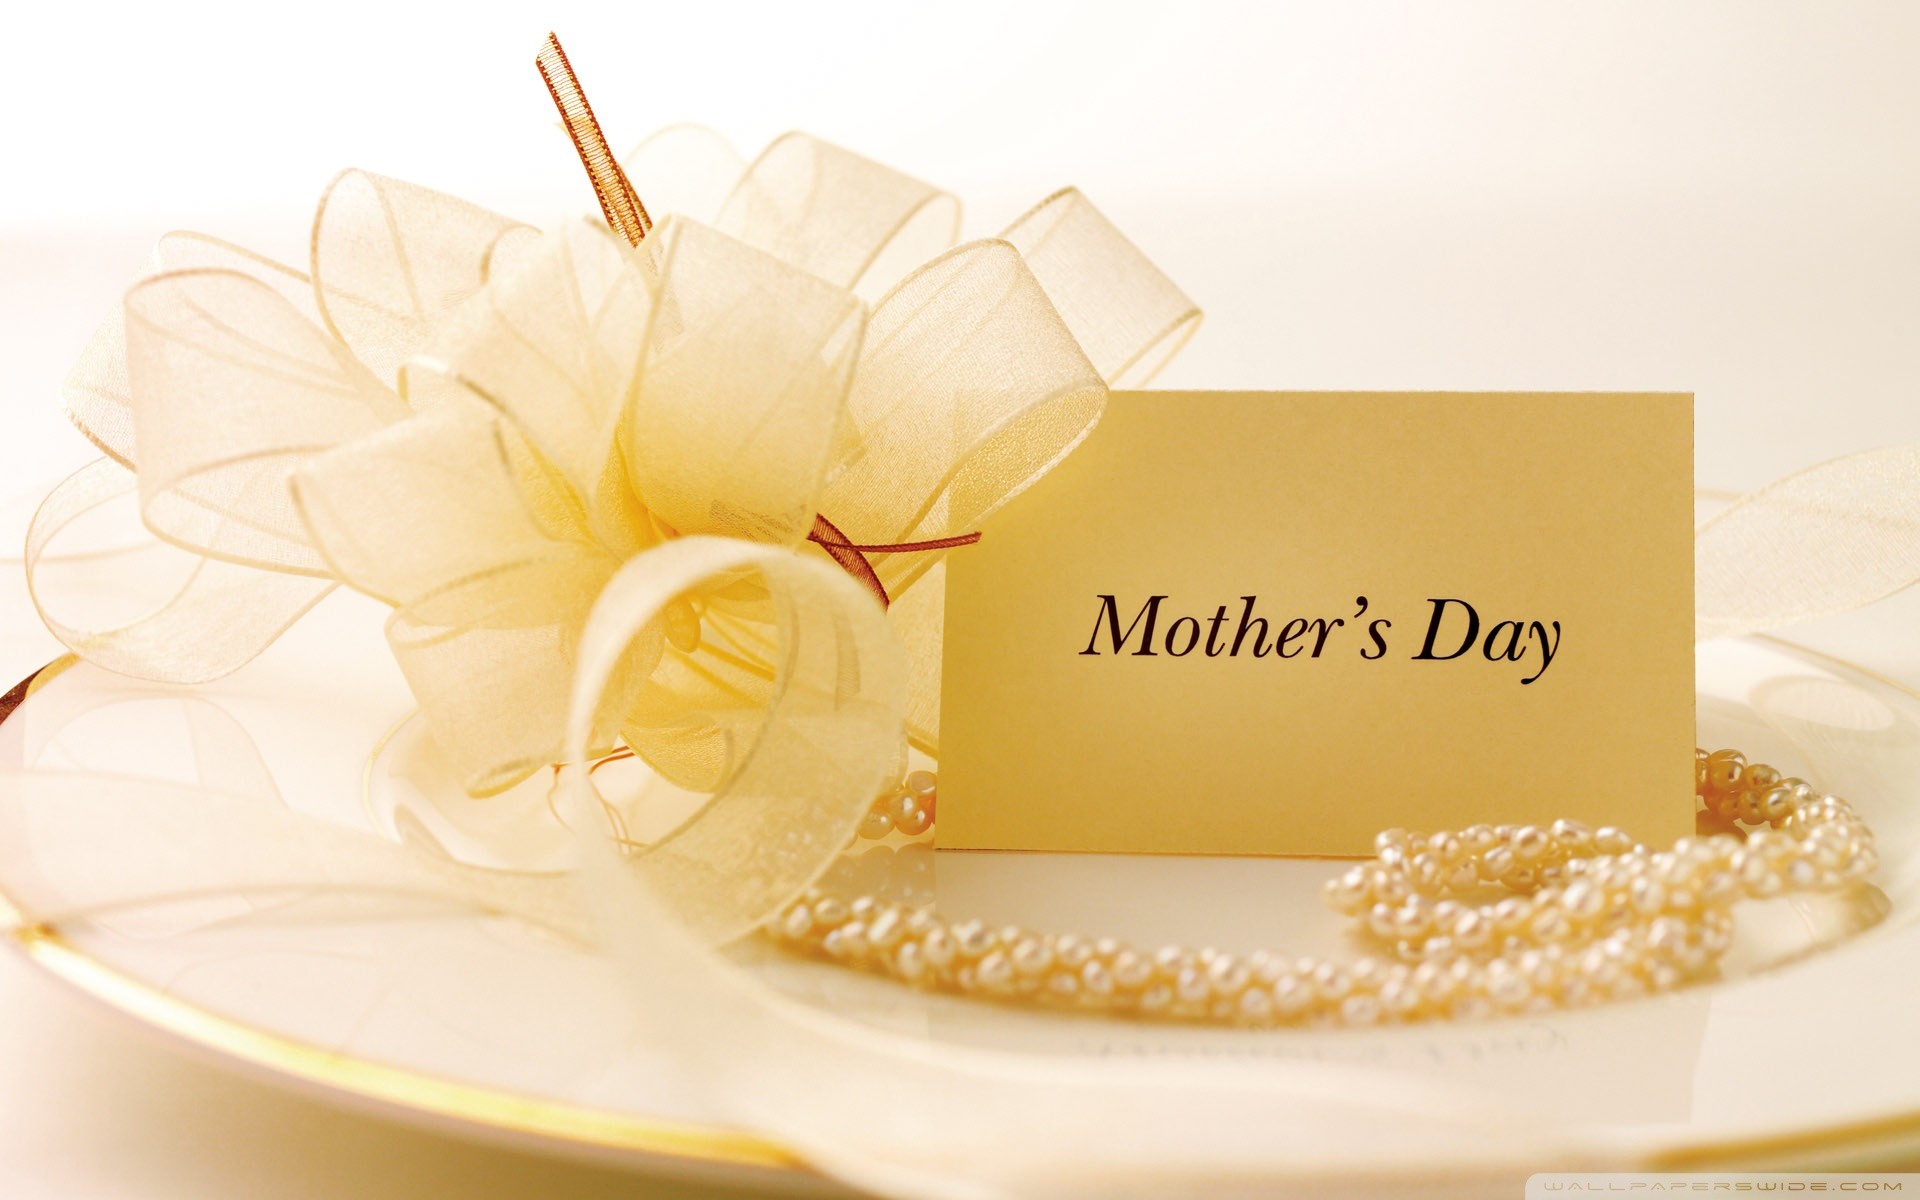 25 Beautiful Mother's Day Wallpapers for Your Desktop - Designbeep